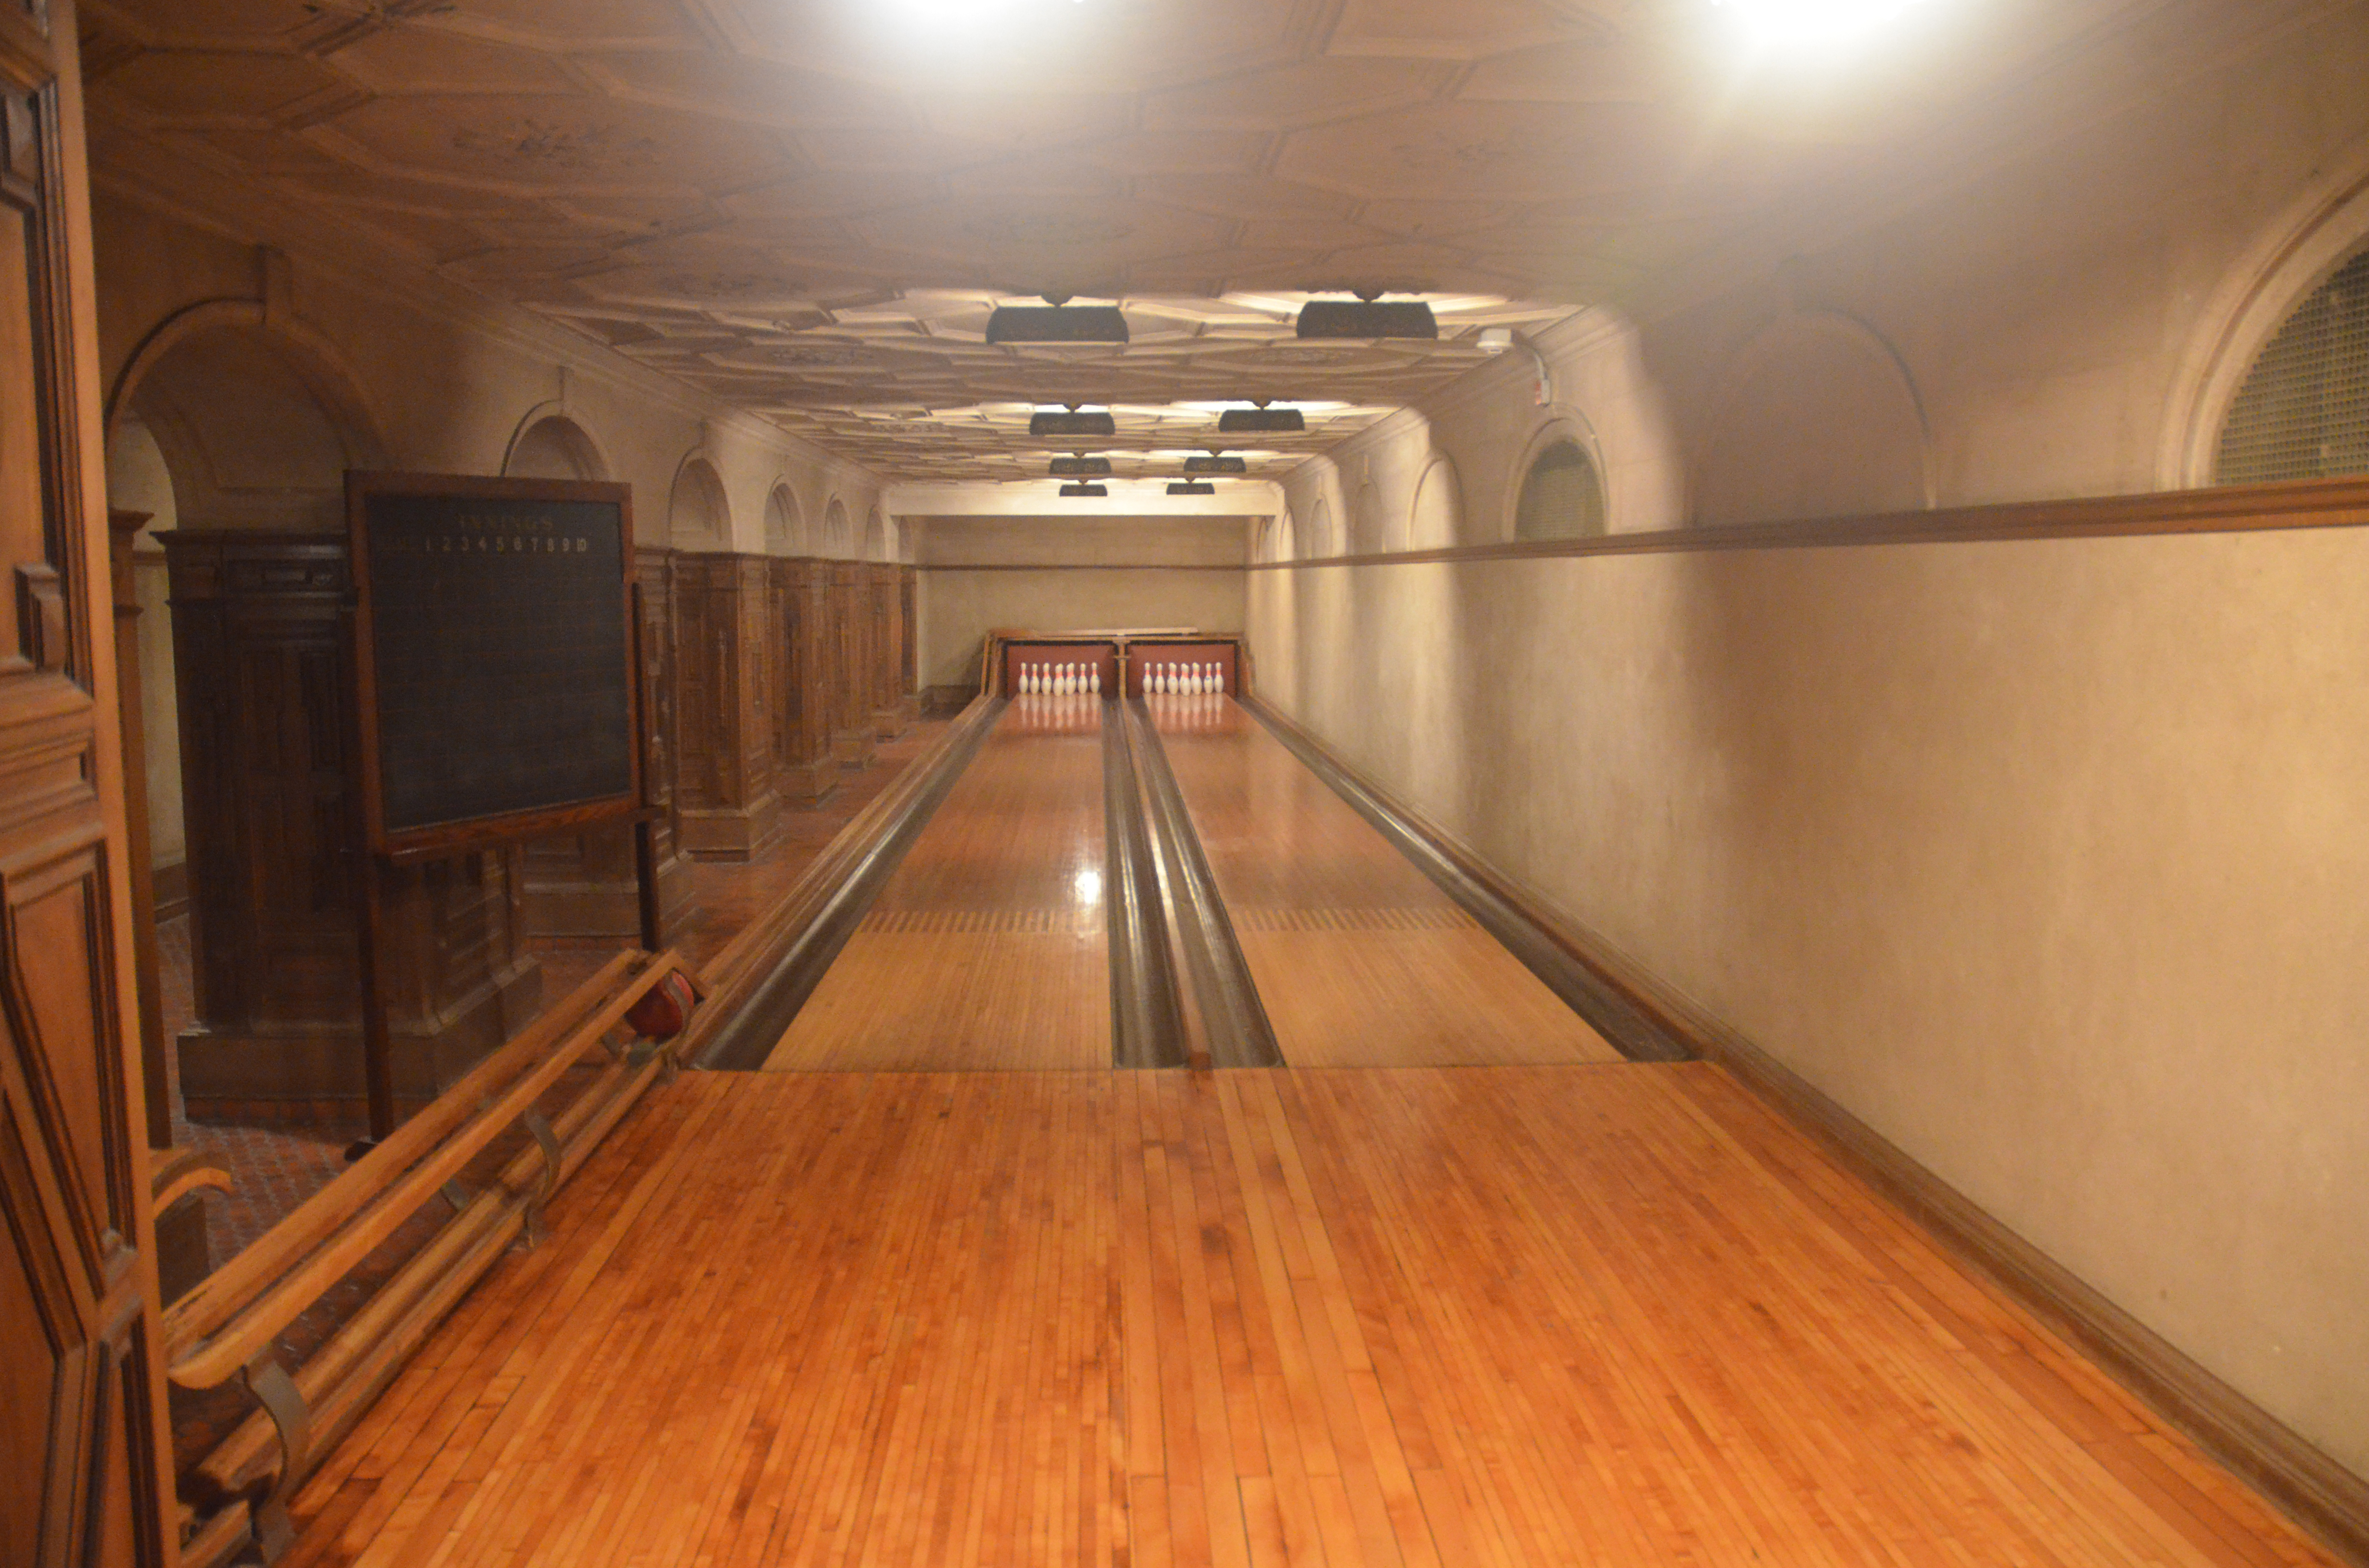 The bowling alley at the Frick Collection as seen in late 2012 (credit: Evan Bindelglass / CBSNewYork)